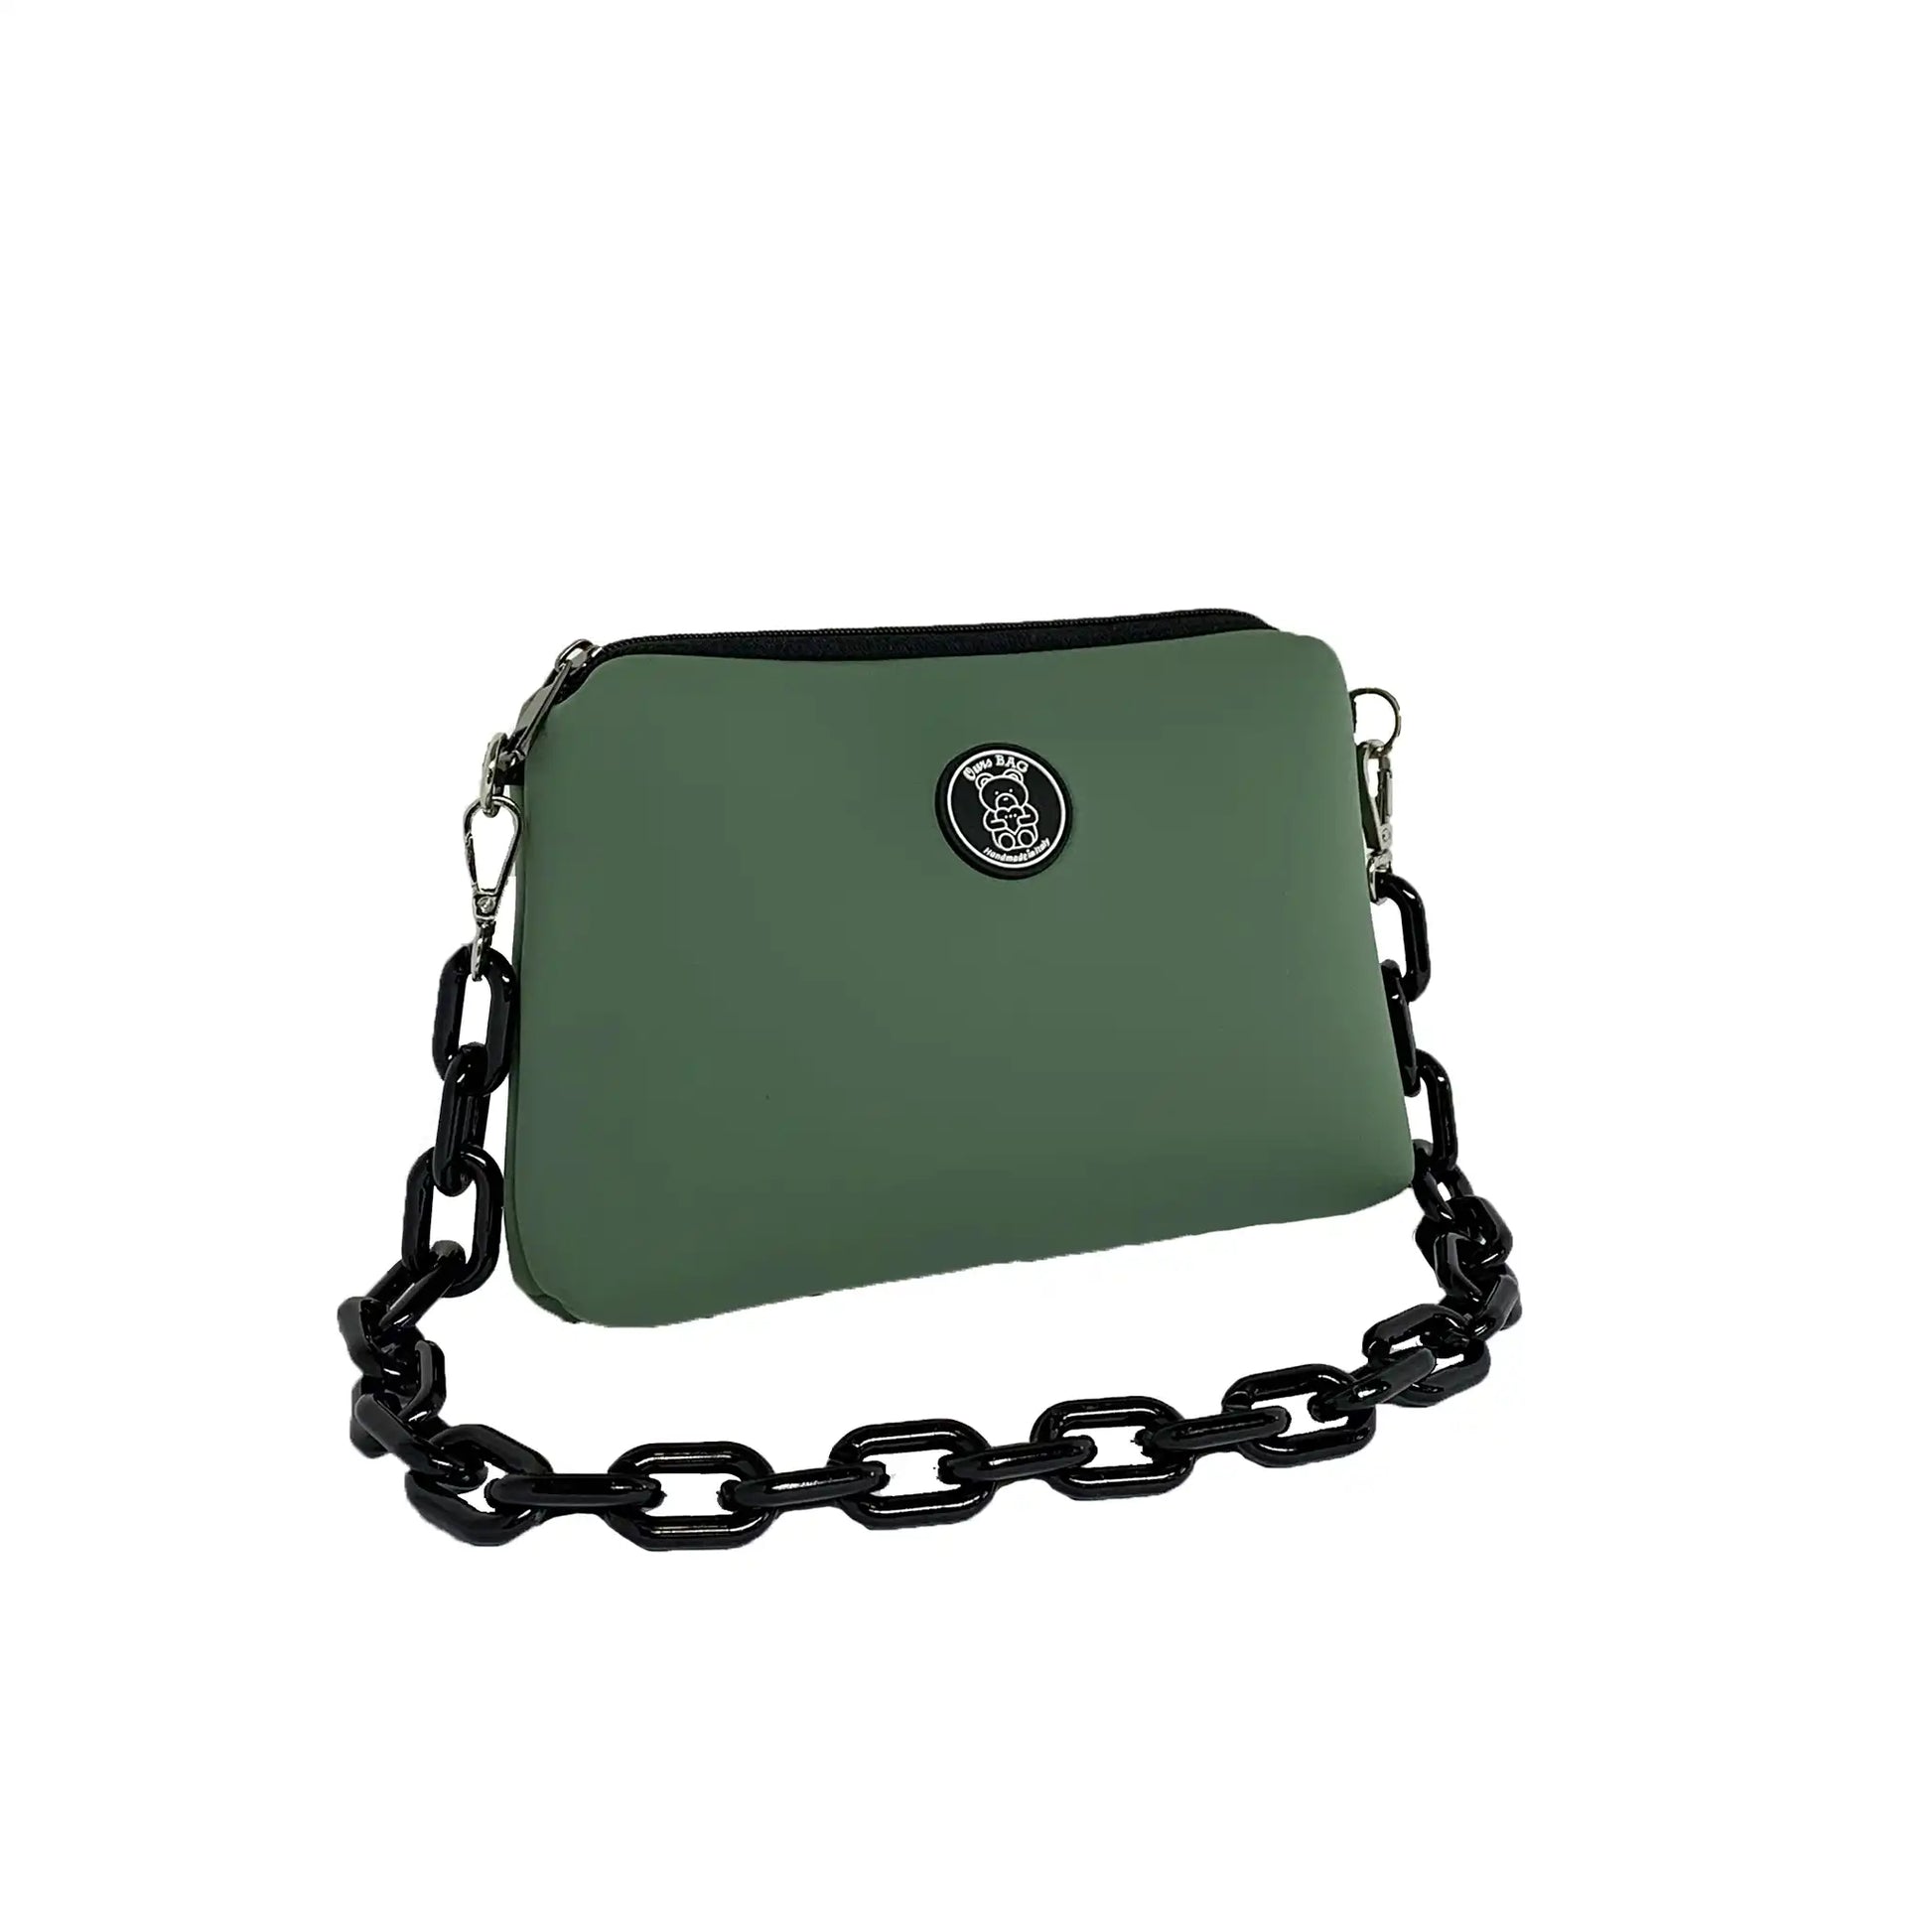 Pochette con Catena (Olive Green) by Ours Bag